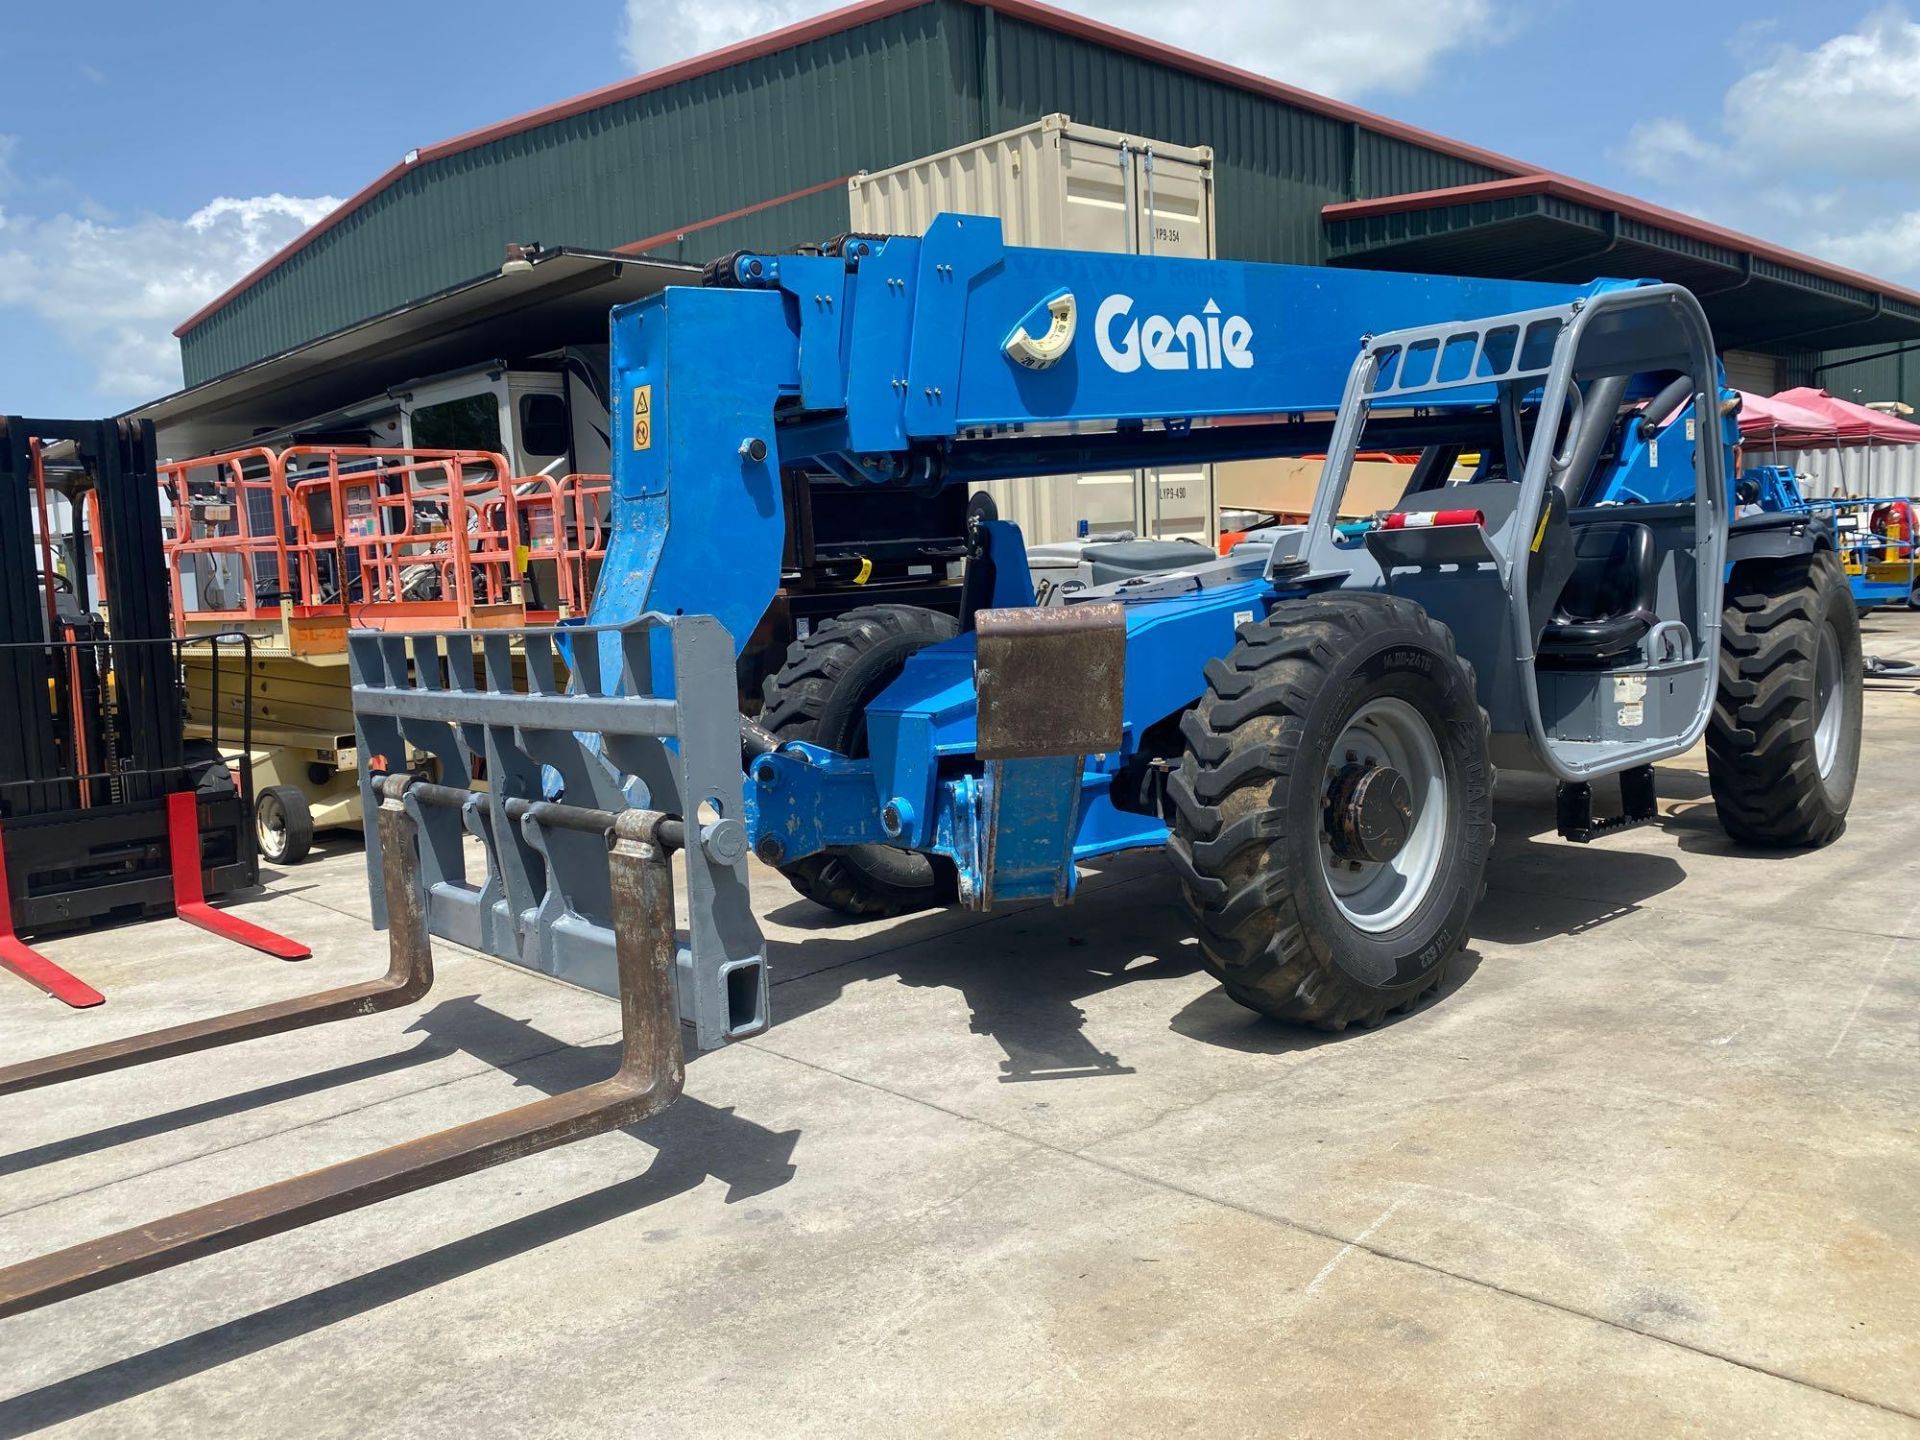 2012 GENIE GTH-1056, DIESEL TELEHANDLER, 10,000LB CAPACITY, FOAM FILLED TIRES, OUTRIGGERS, RUNS AND